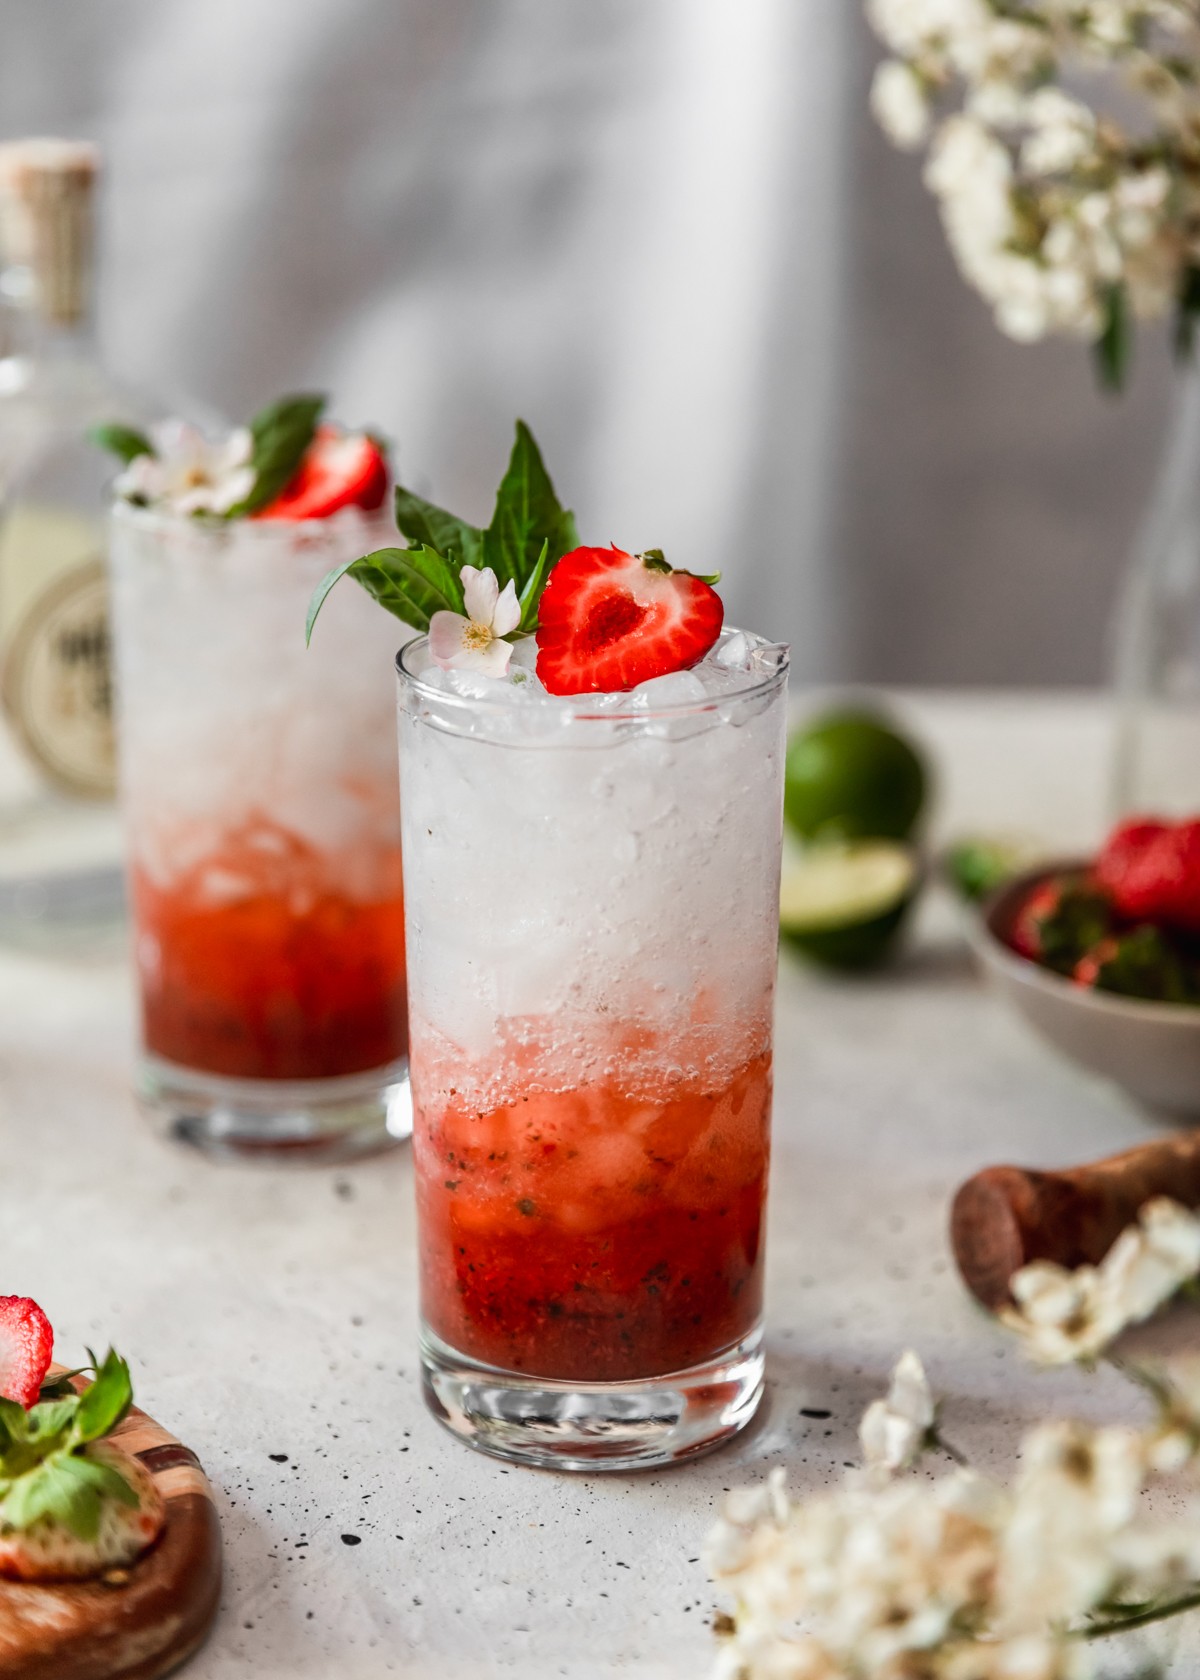 A side image of a tall clear glass filled  with a strawberry gin smash cocktail and garnished with a half strawberry, white flower and basil on a white table. In the background is another cocktail, a bottle of gin, a grey bowl of strawberries, a lime, and white blossoms.